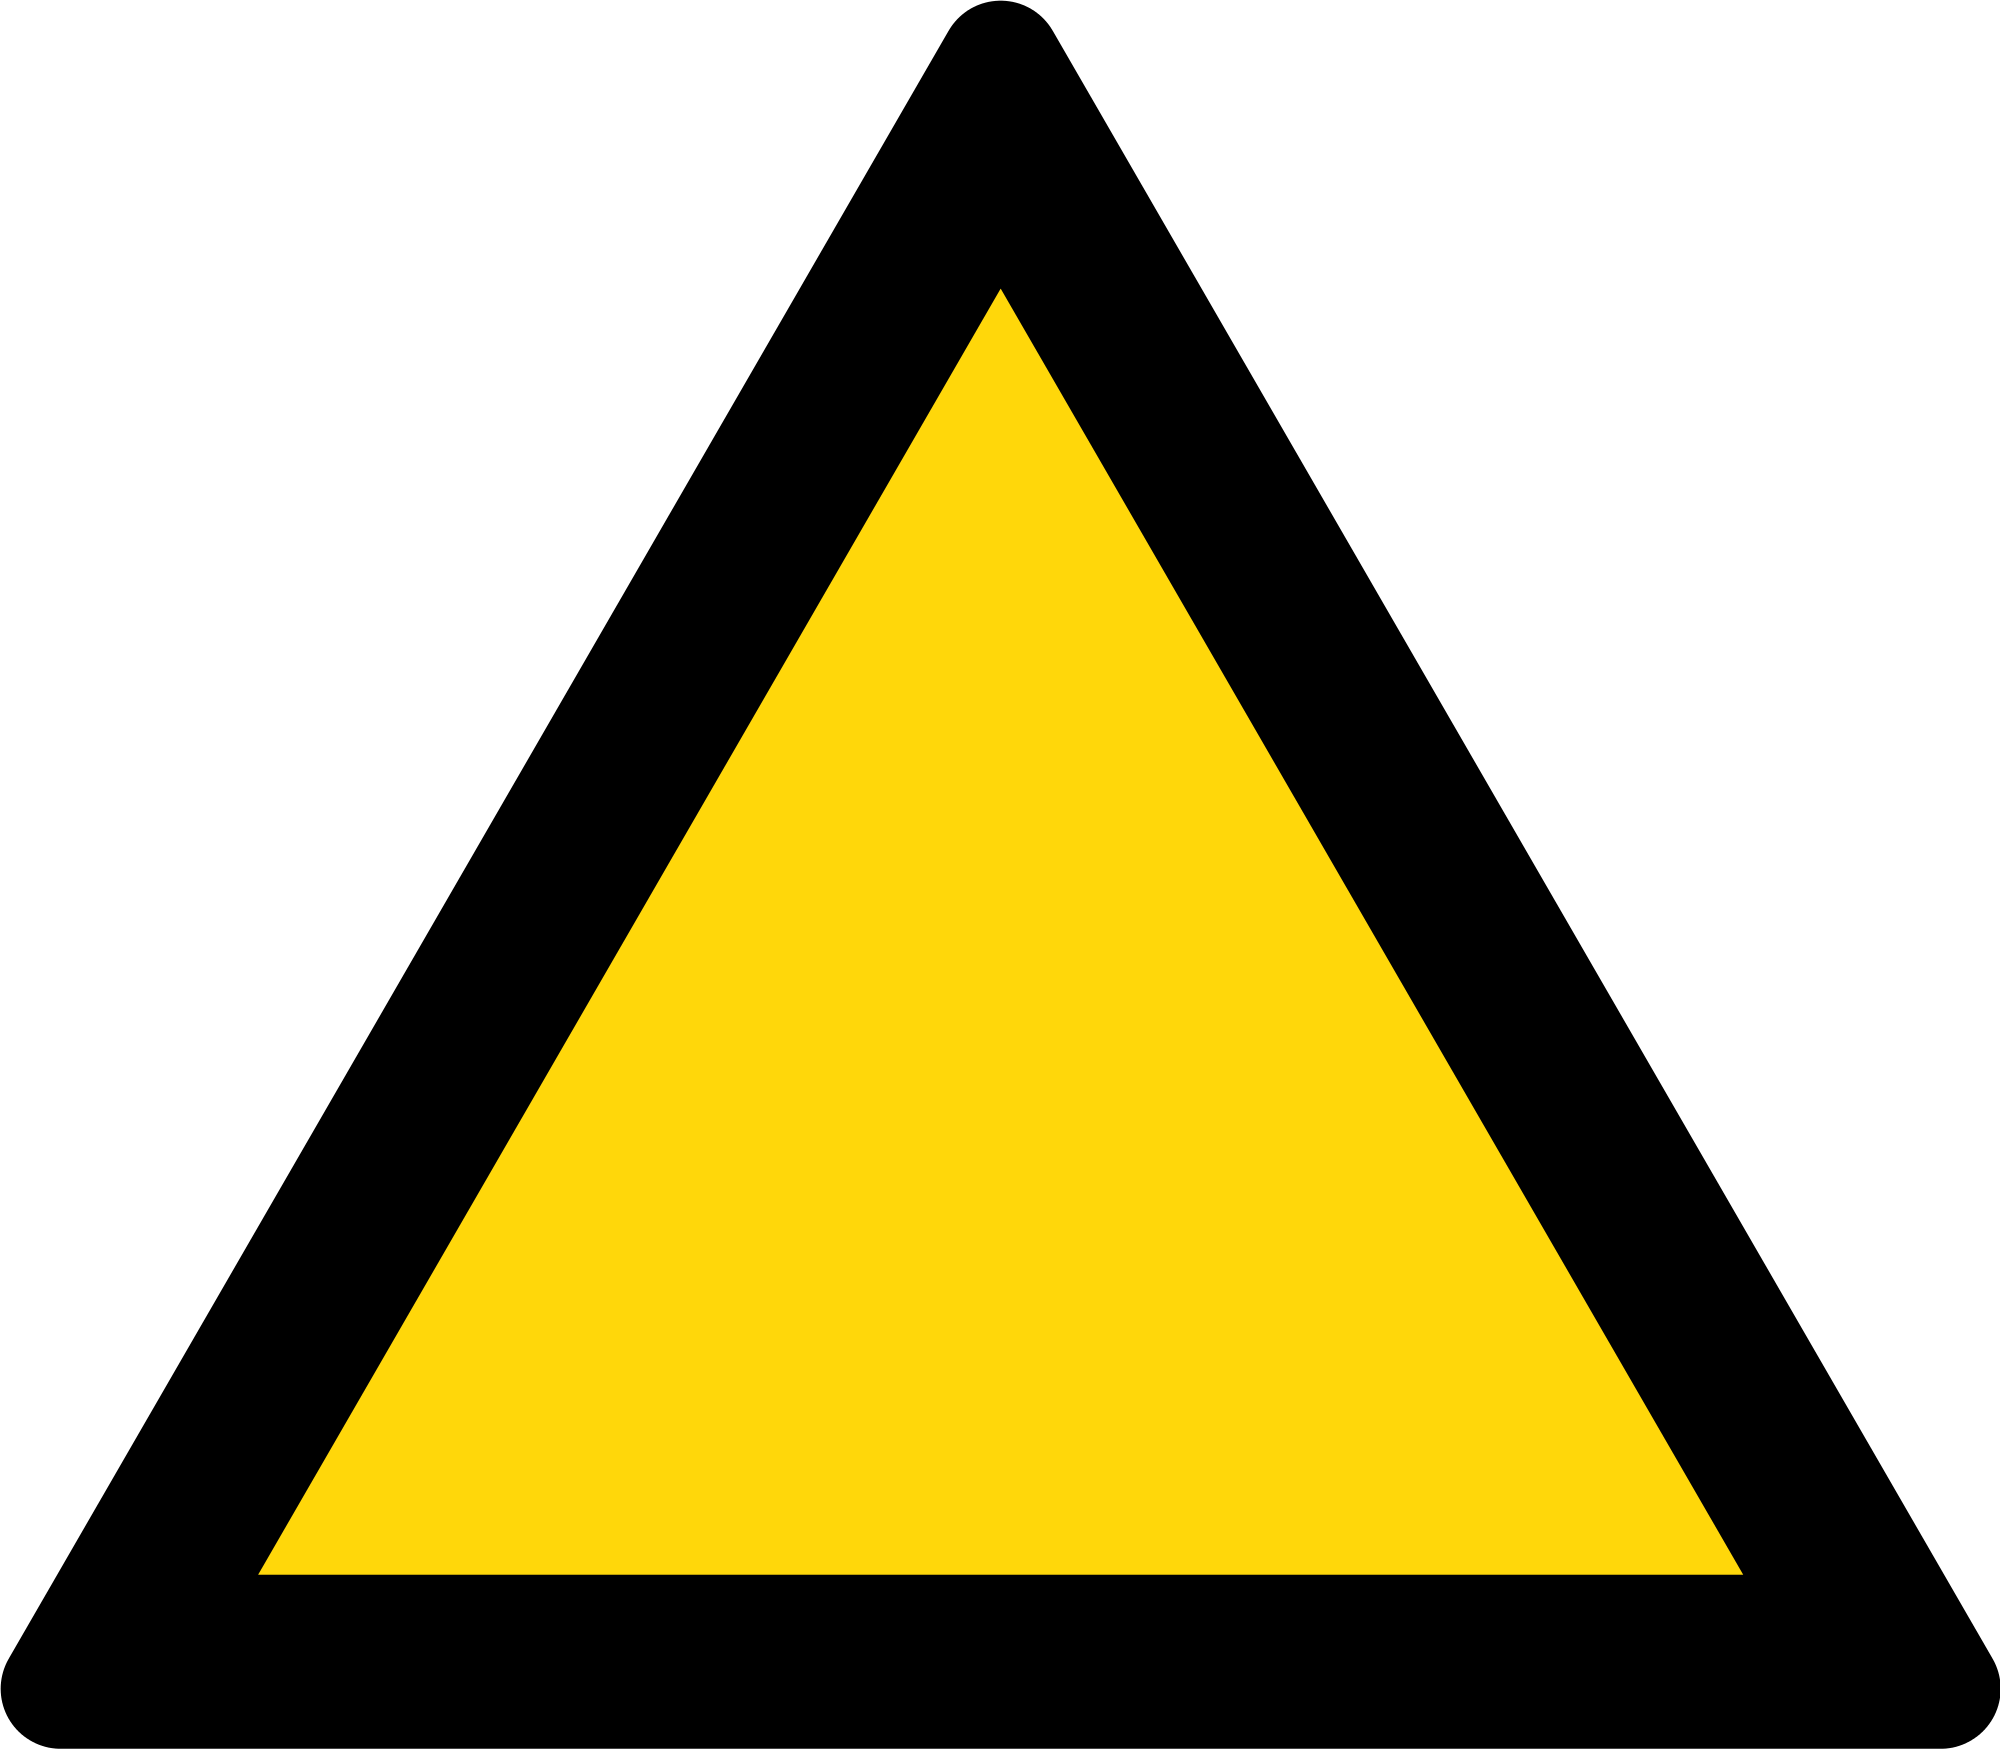 Black Yellow Triangle Logo - Triangle warning sign (black and yellow).svg